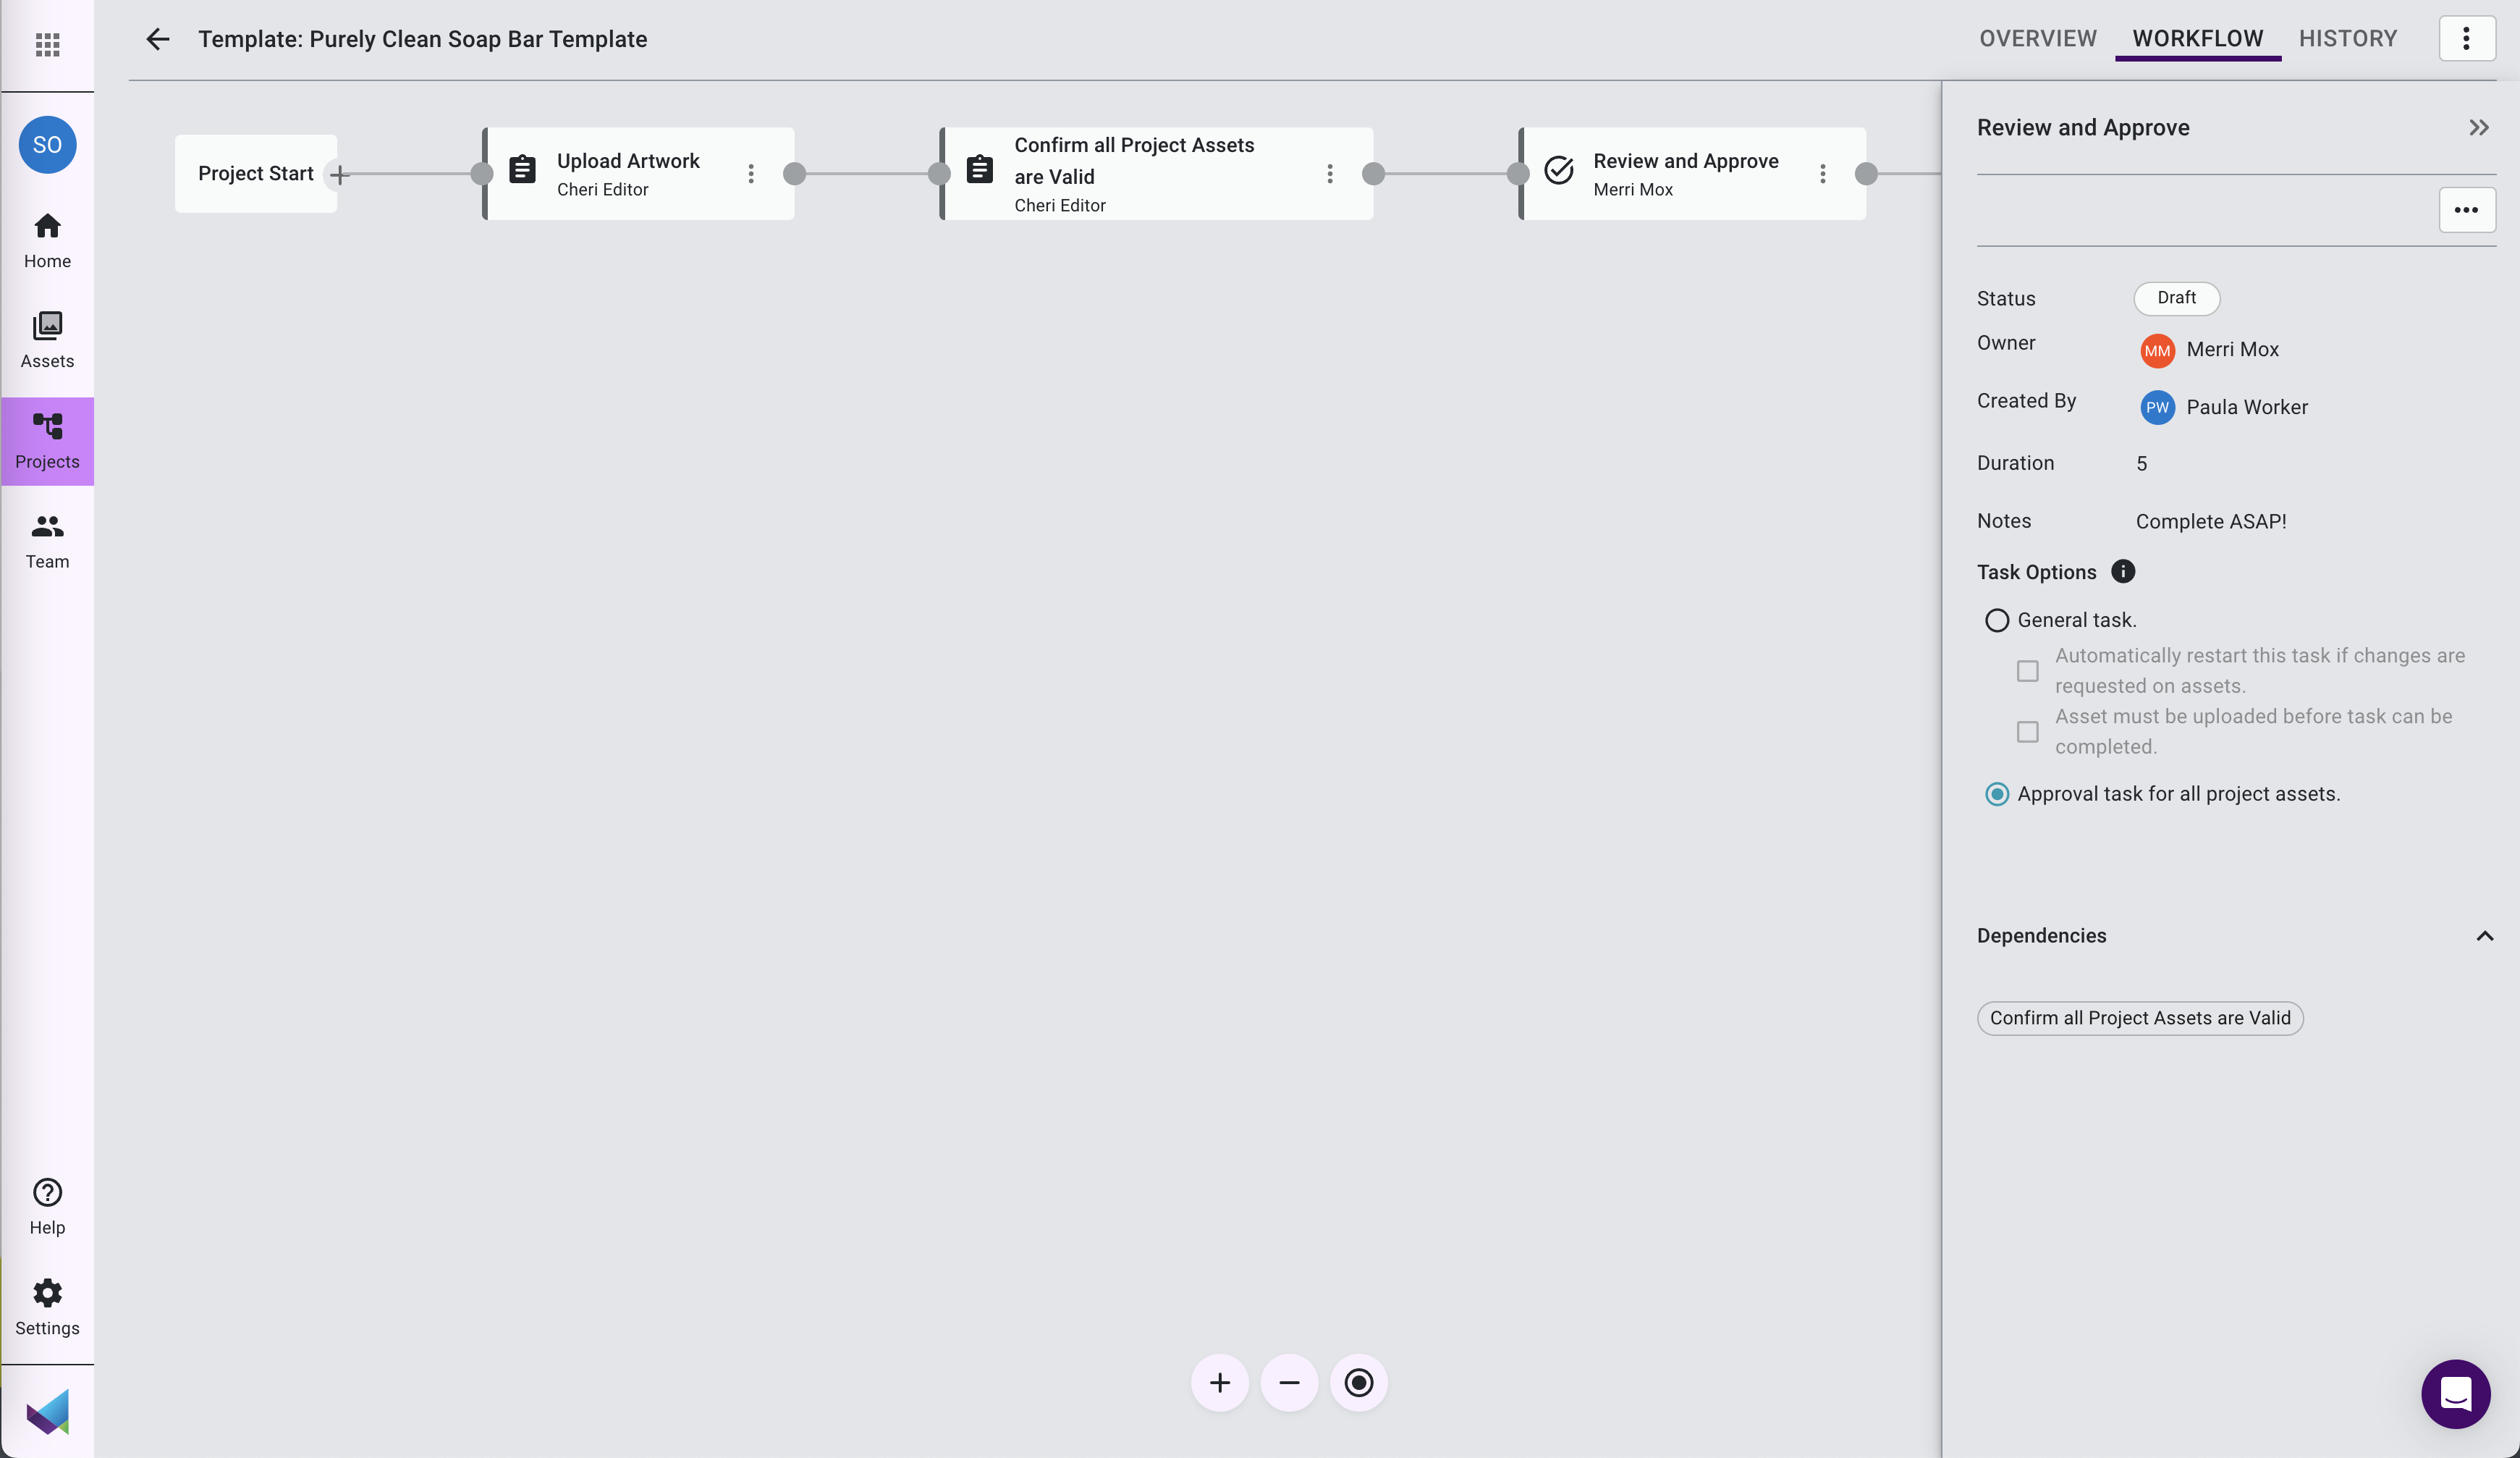 Image shows the workflow builder in Mox